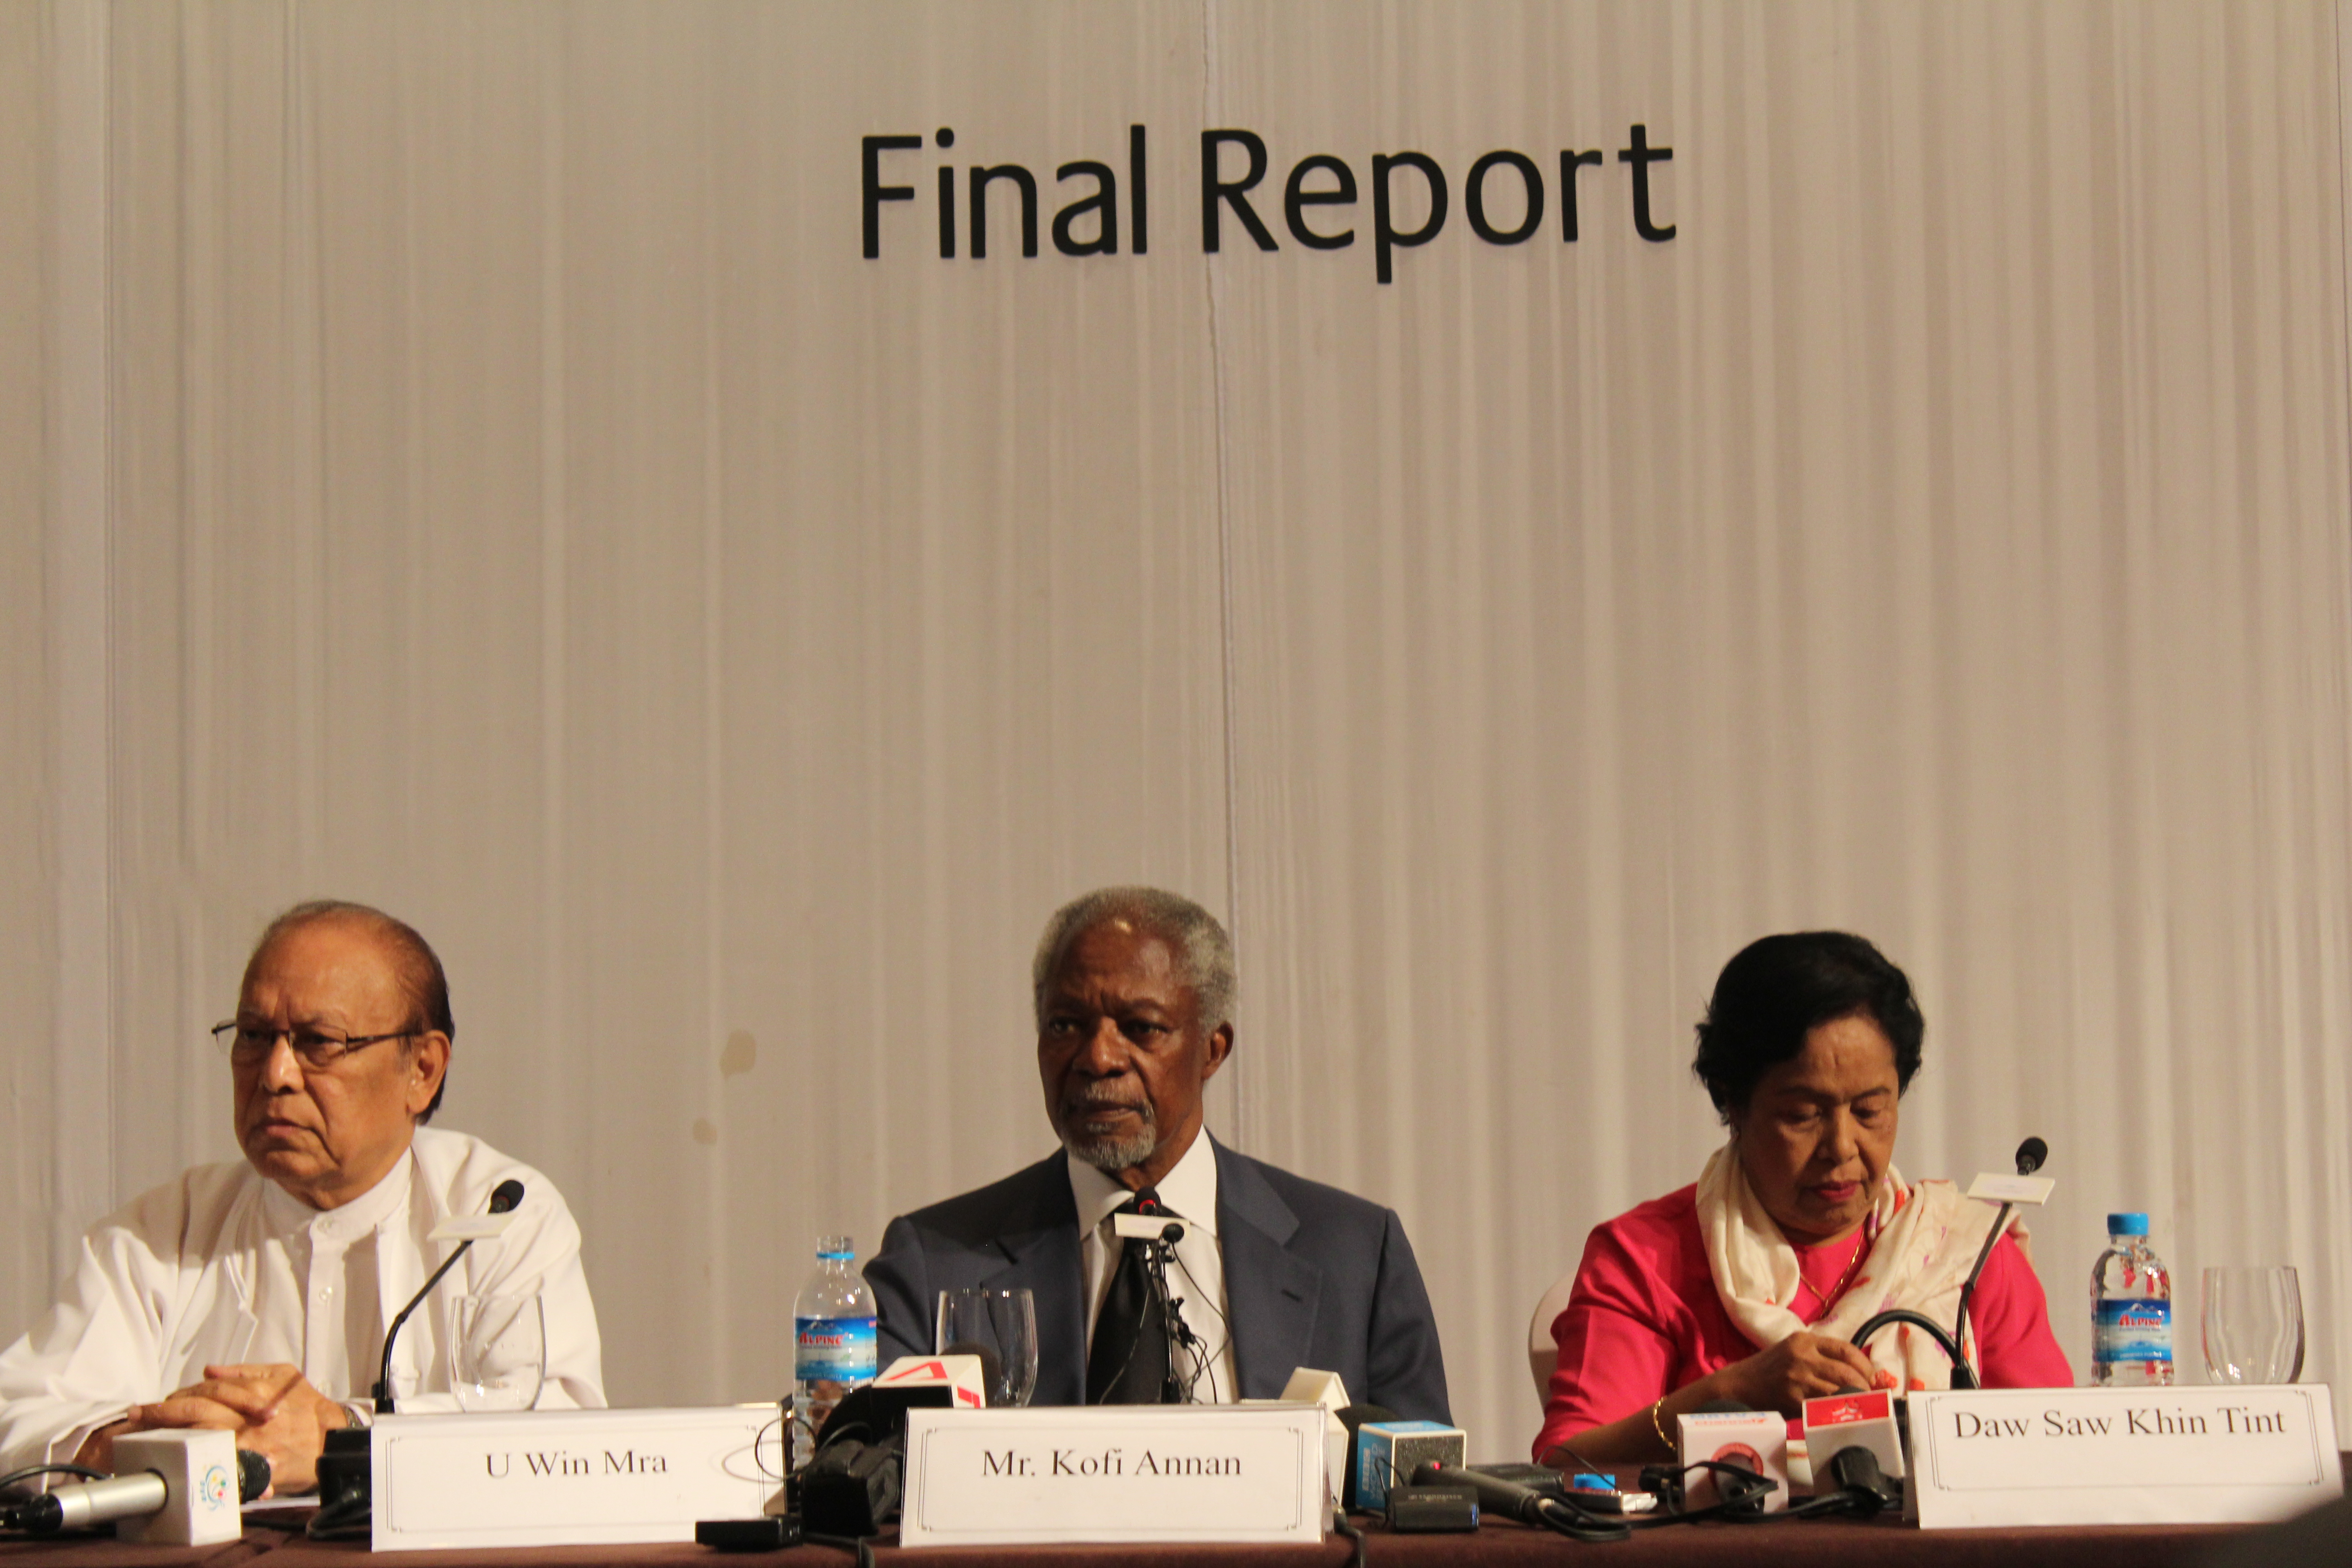 Former UN secretary general Kofi Annan (C) talks during a press conference about his commission’s final report in Yangon on August 24, 2017. Photo: Jacob Goldberg